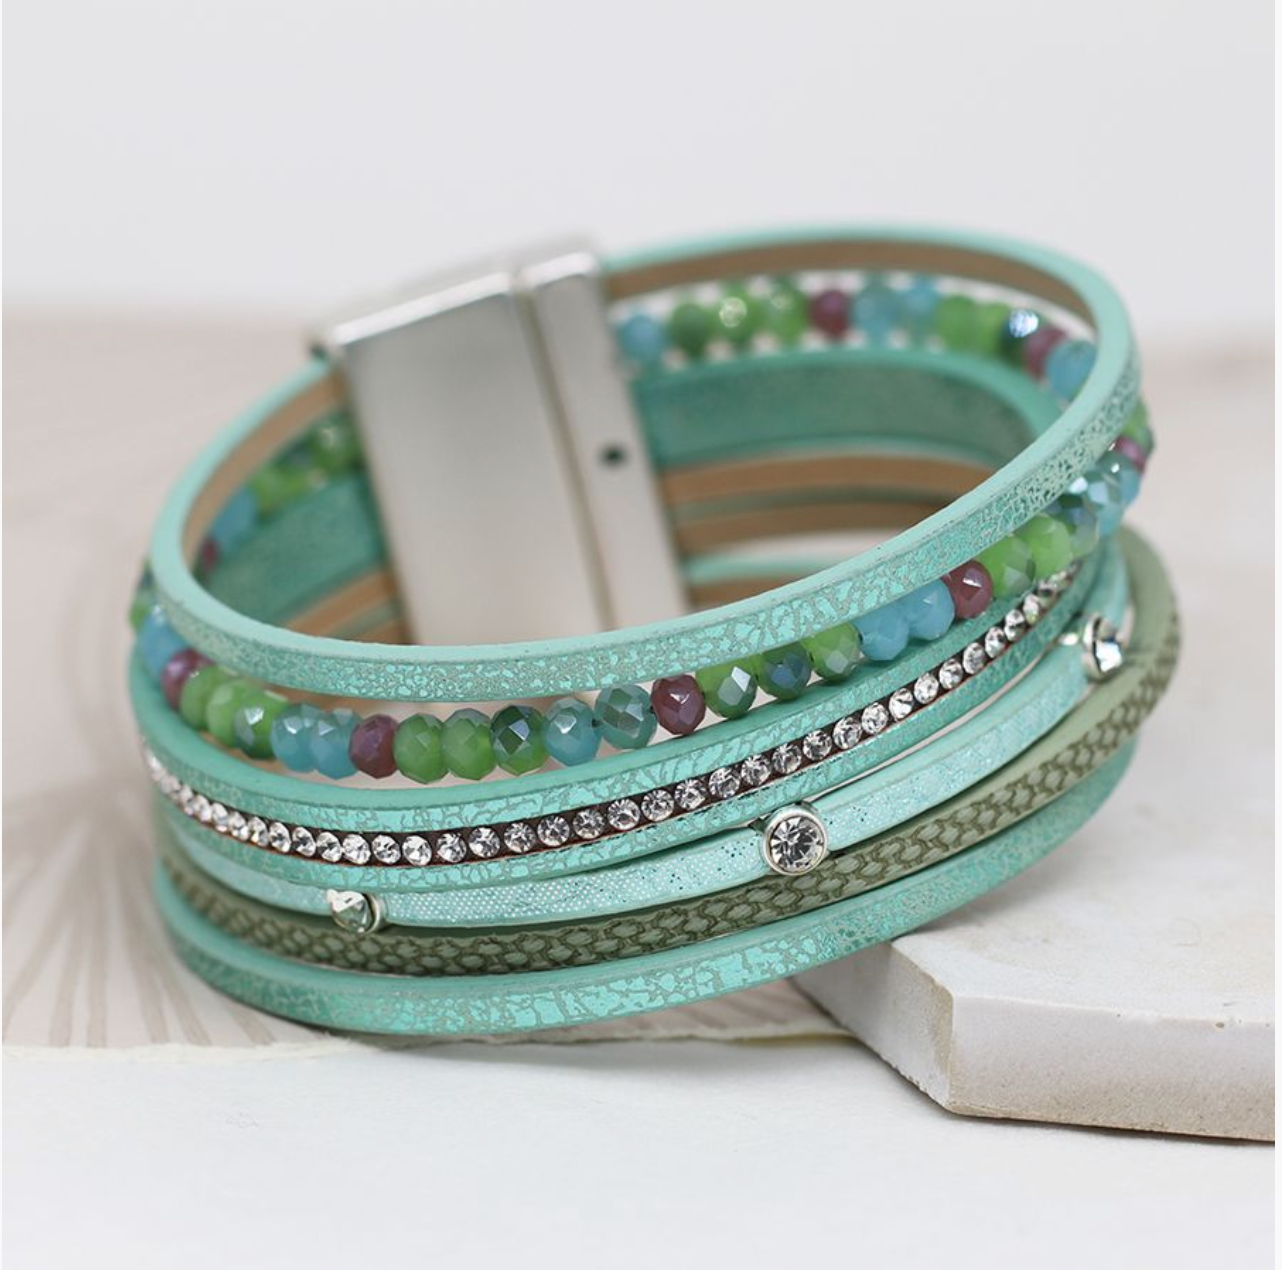 Aqua leather bracelet with mixed beads and crystals